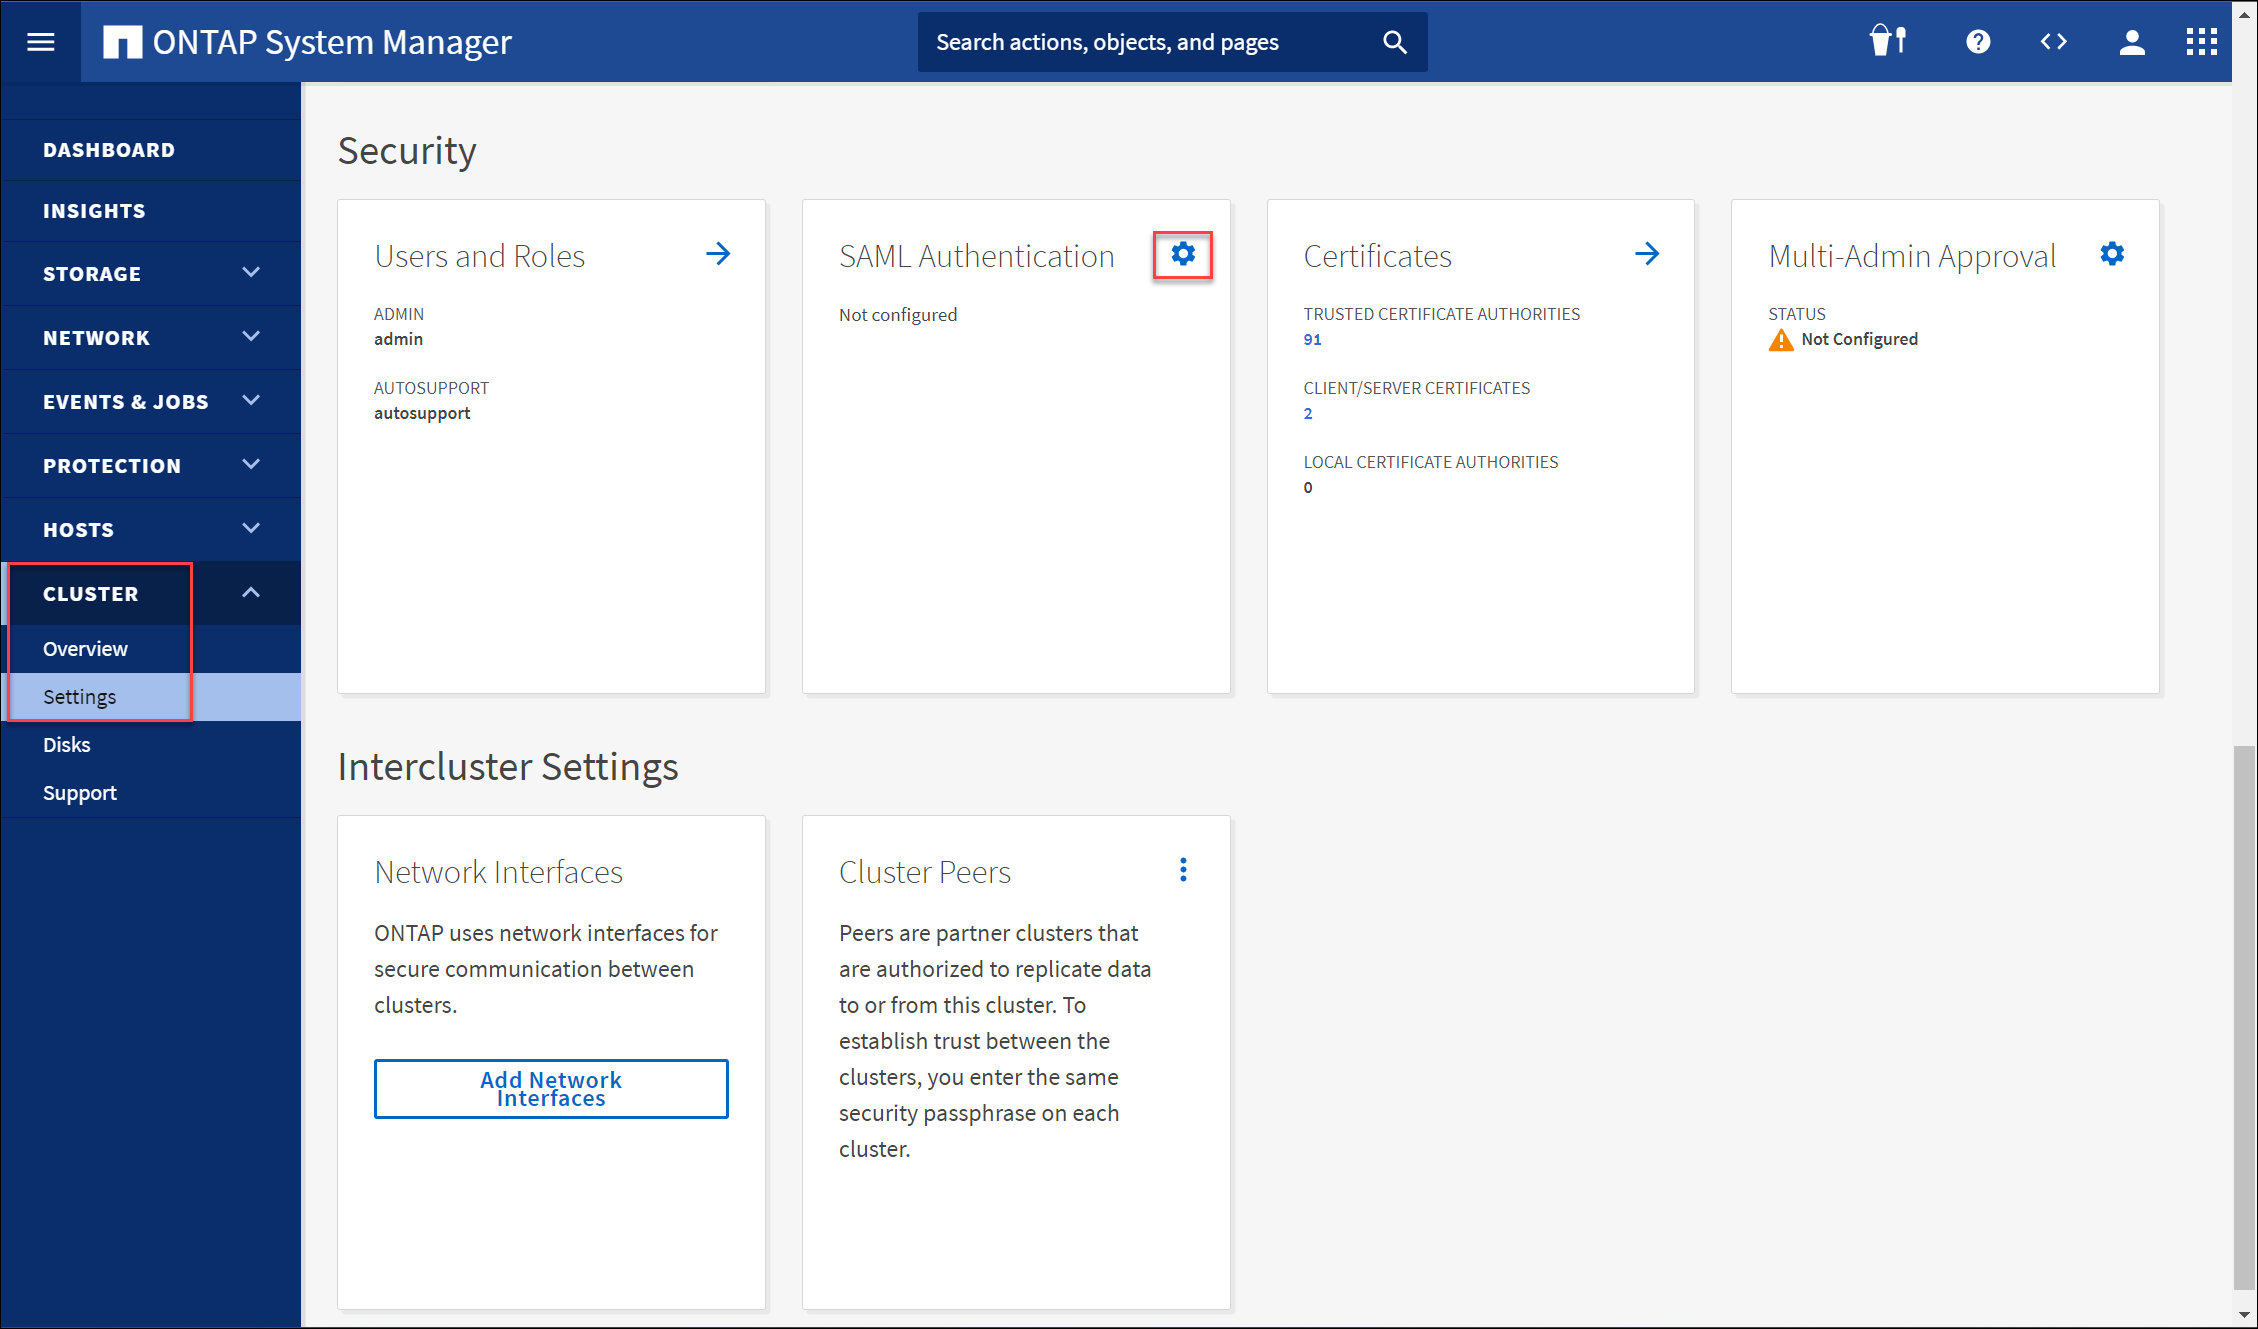 Screenshot of the NetApp ONTAP System Manager - Cluster Settings UI